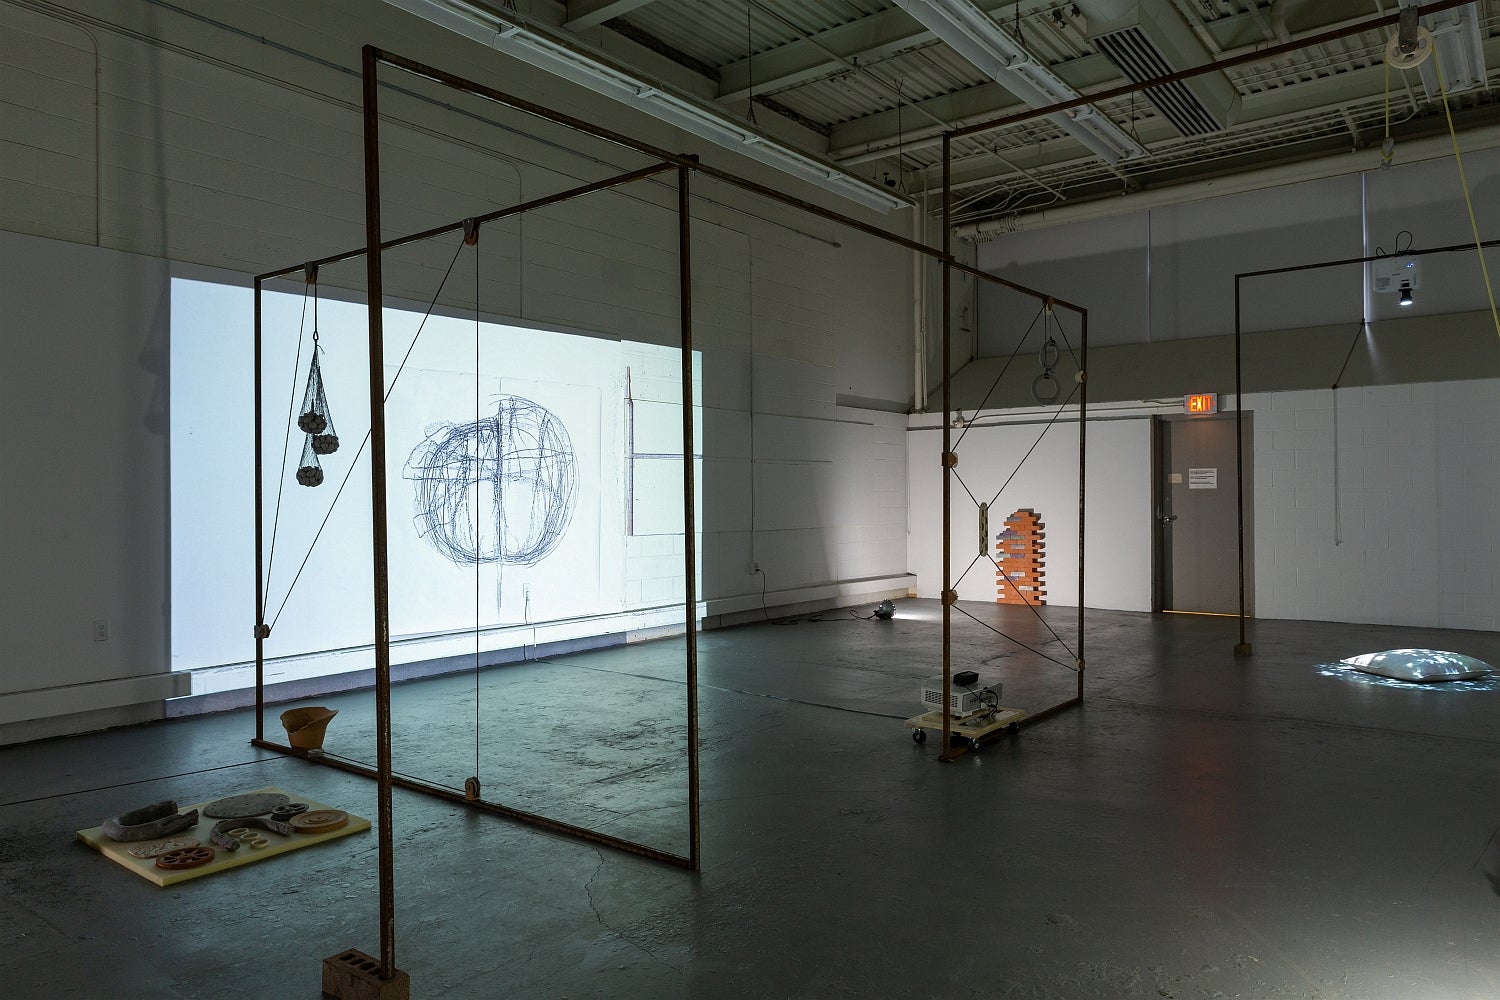 Dark, industrial space with art installation. Projectors light objects on the concrete floor and video of a drawing on the wall